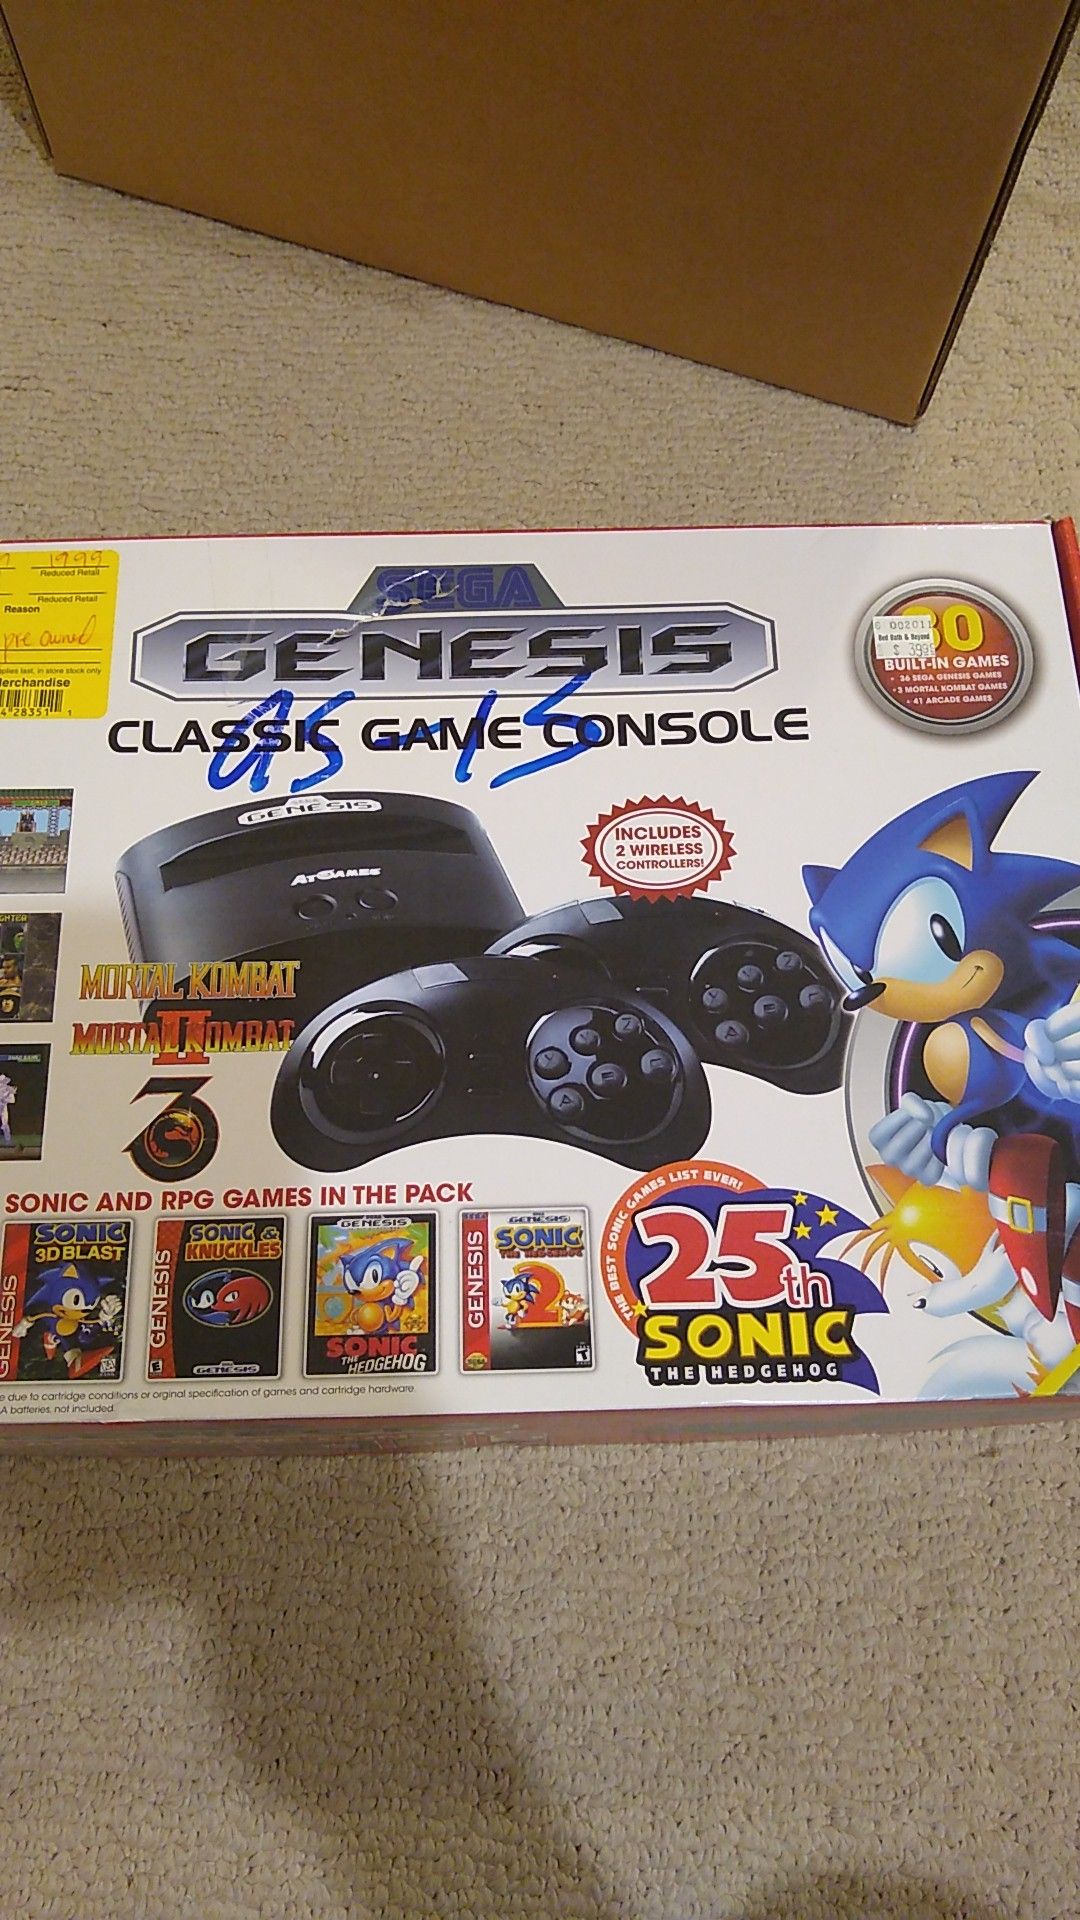 Sega Genesis Video Game Console with 80 Games